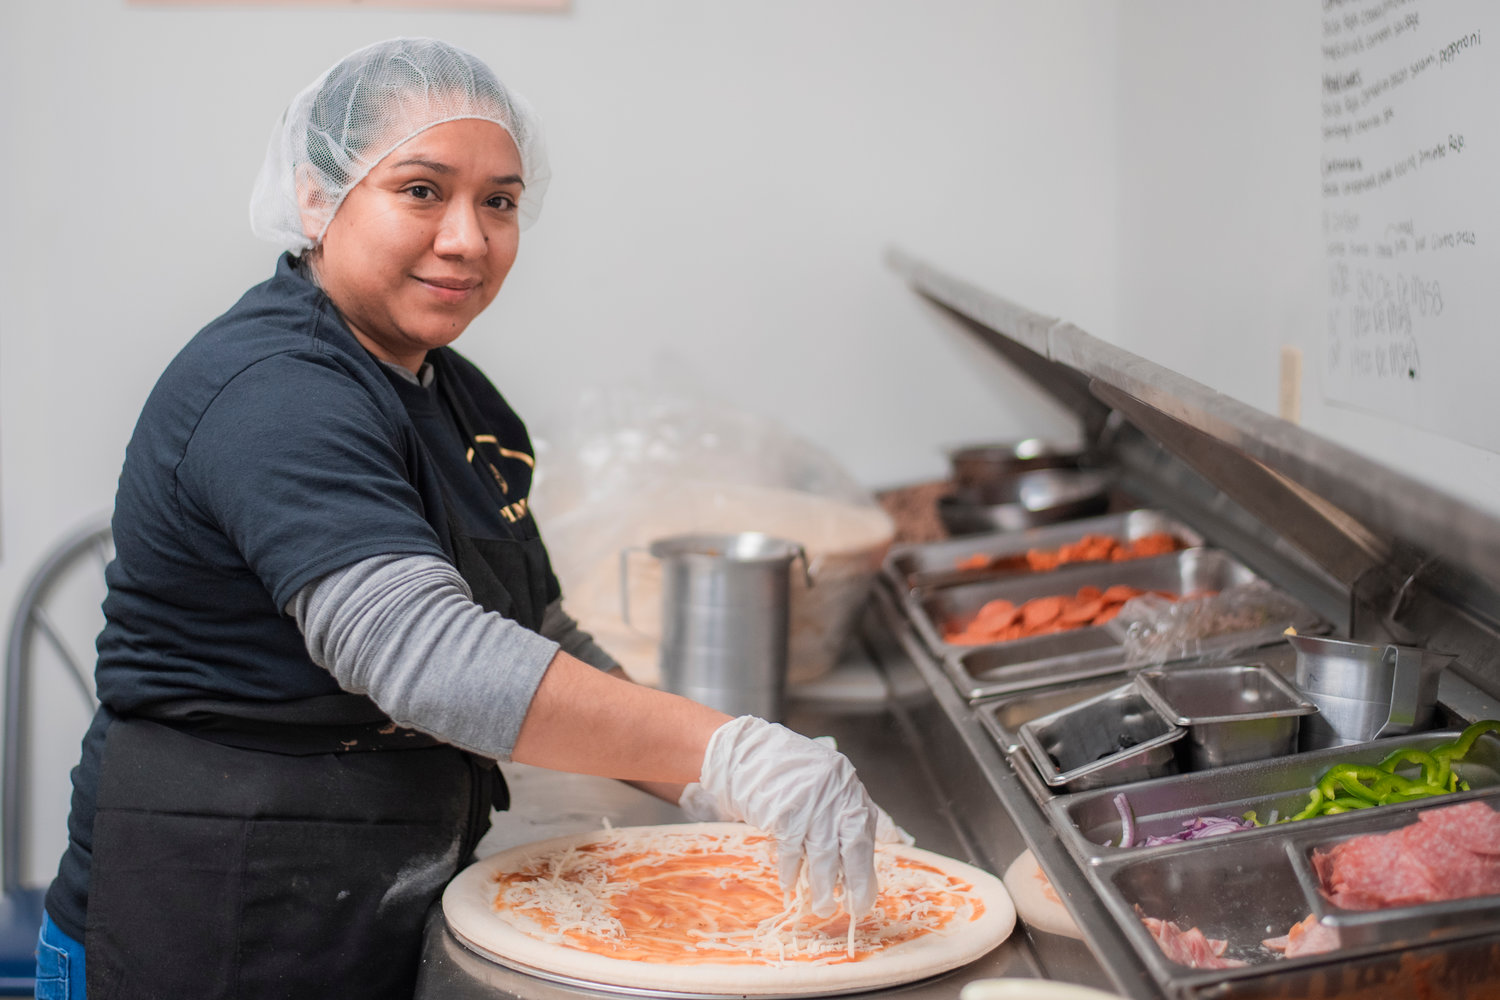 Karla Villegas smiles while stacking cheese and prepping orders at Pizza Mia in Tenino.